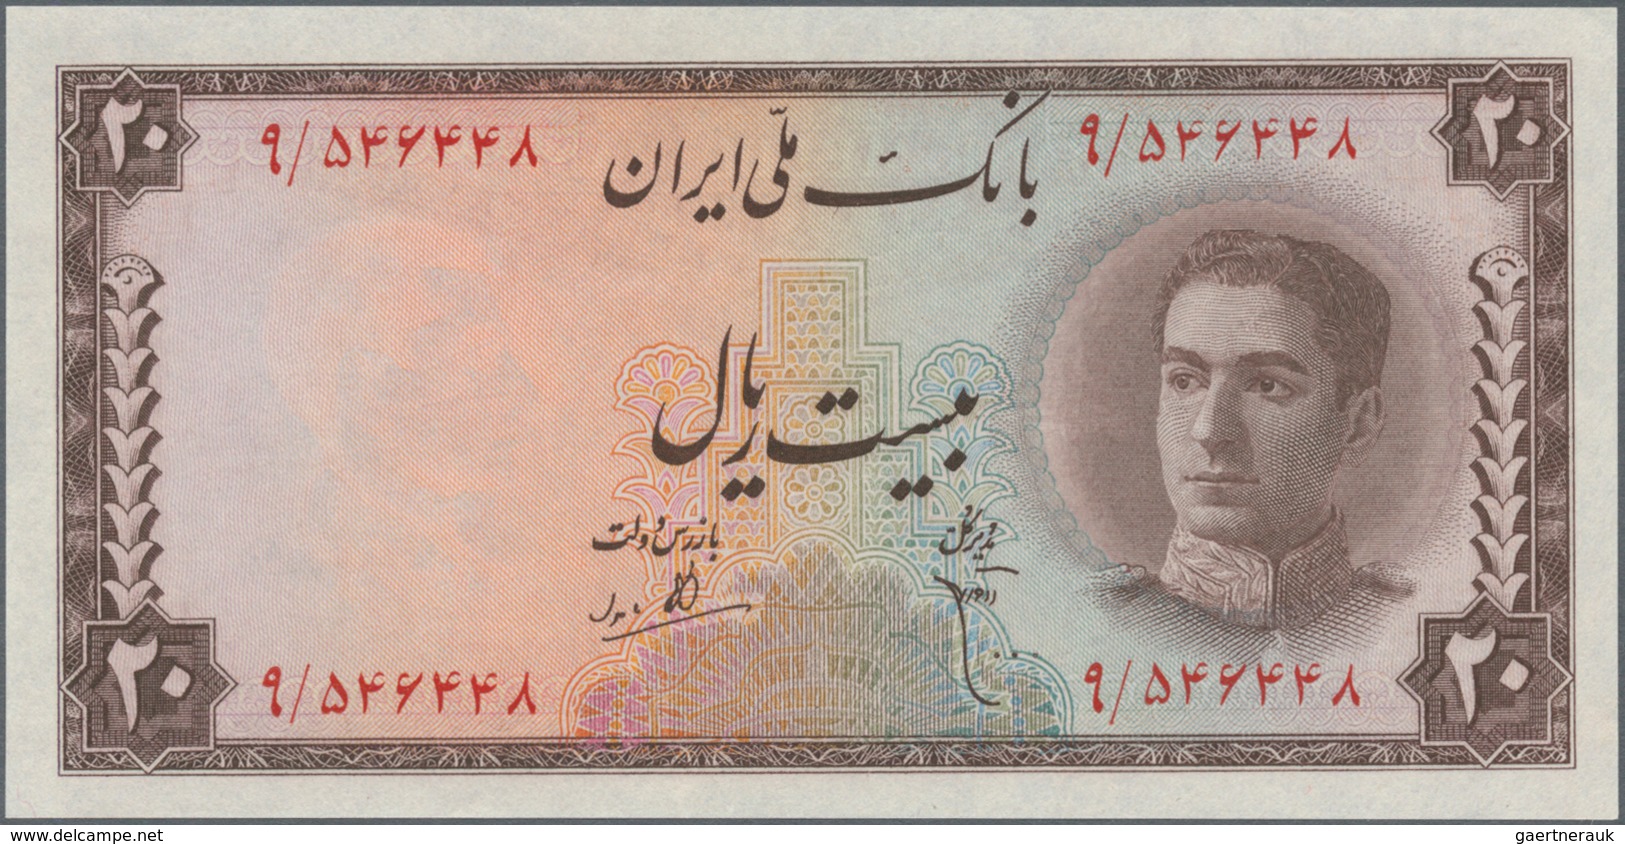 Iran: Set Of 2 Consecutive Notes 20 Rials ND(1948) P. 48, In Condition: UNC. (2 Pcs) - Irán